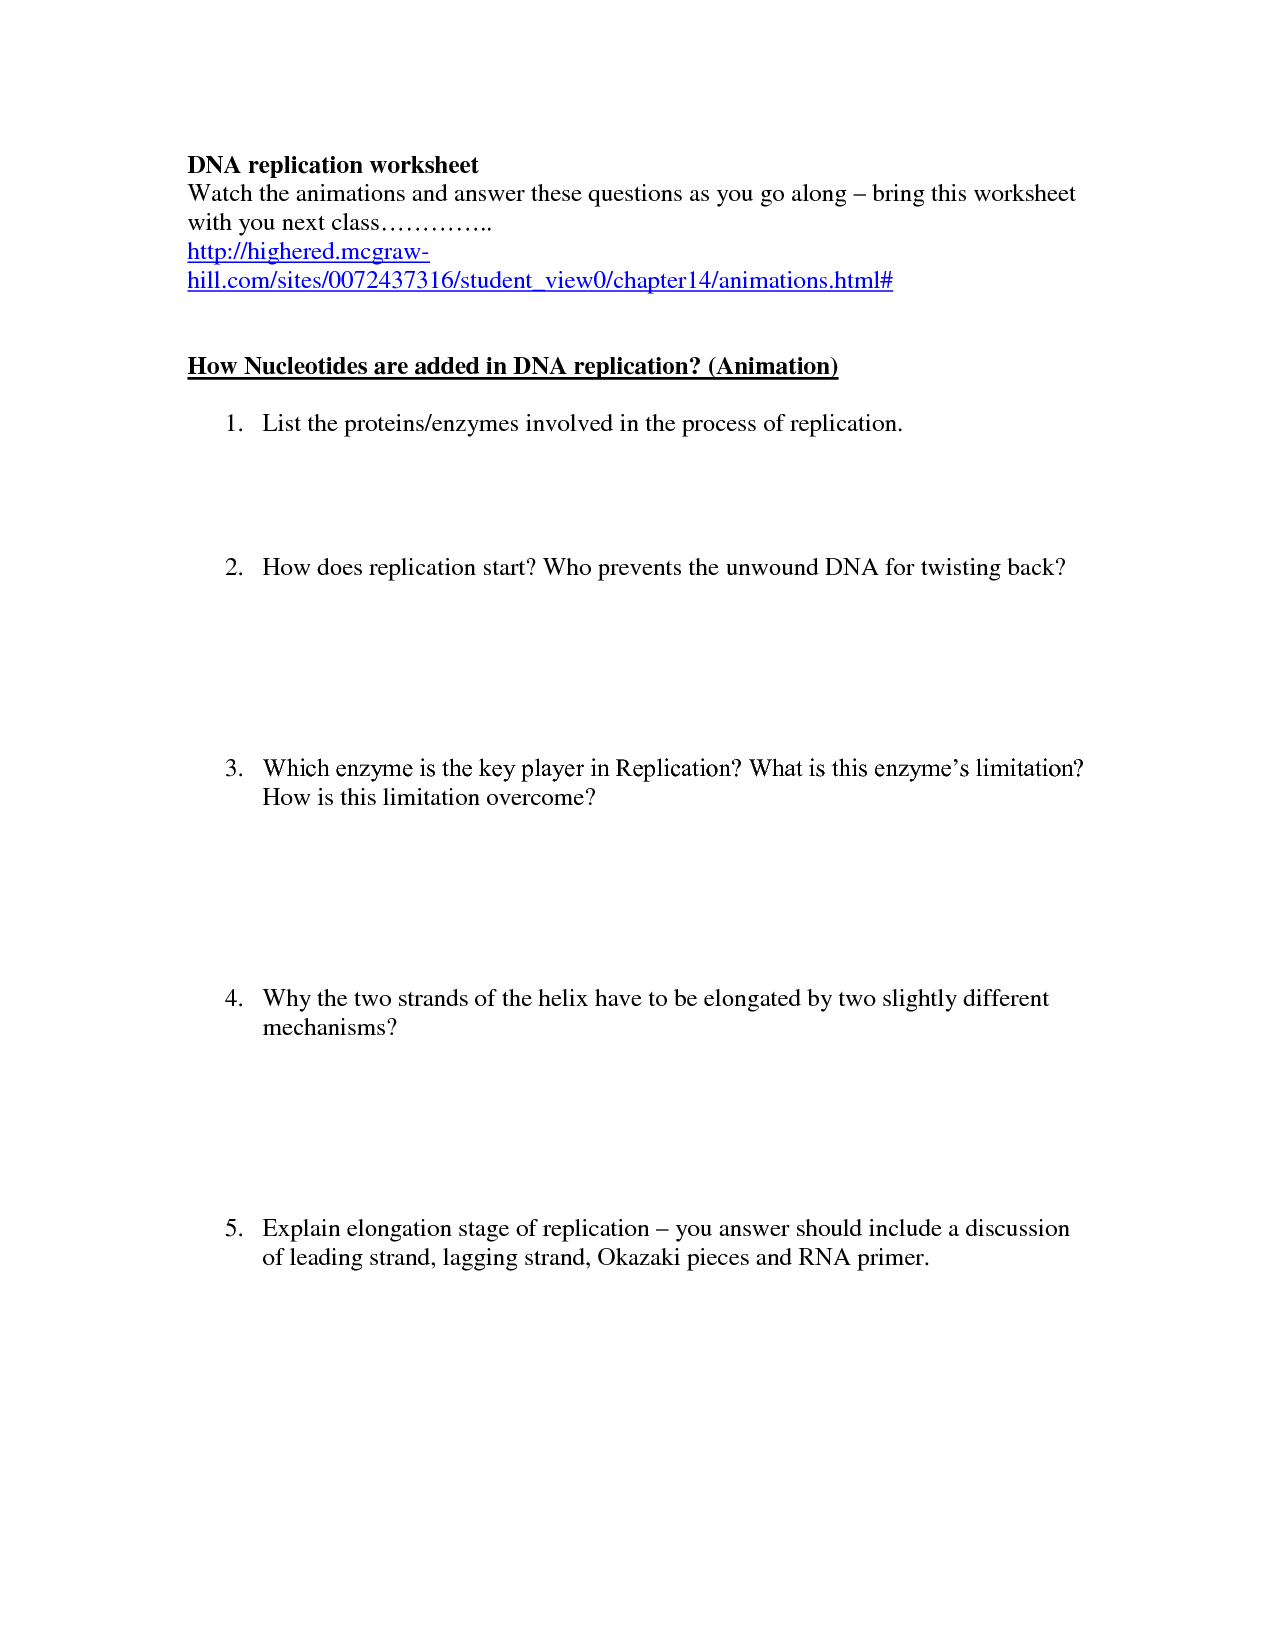 DNA Replication Worksheet Answers